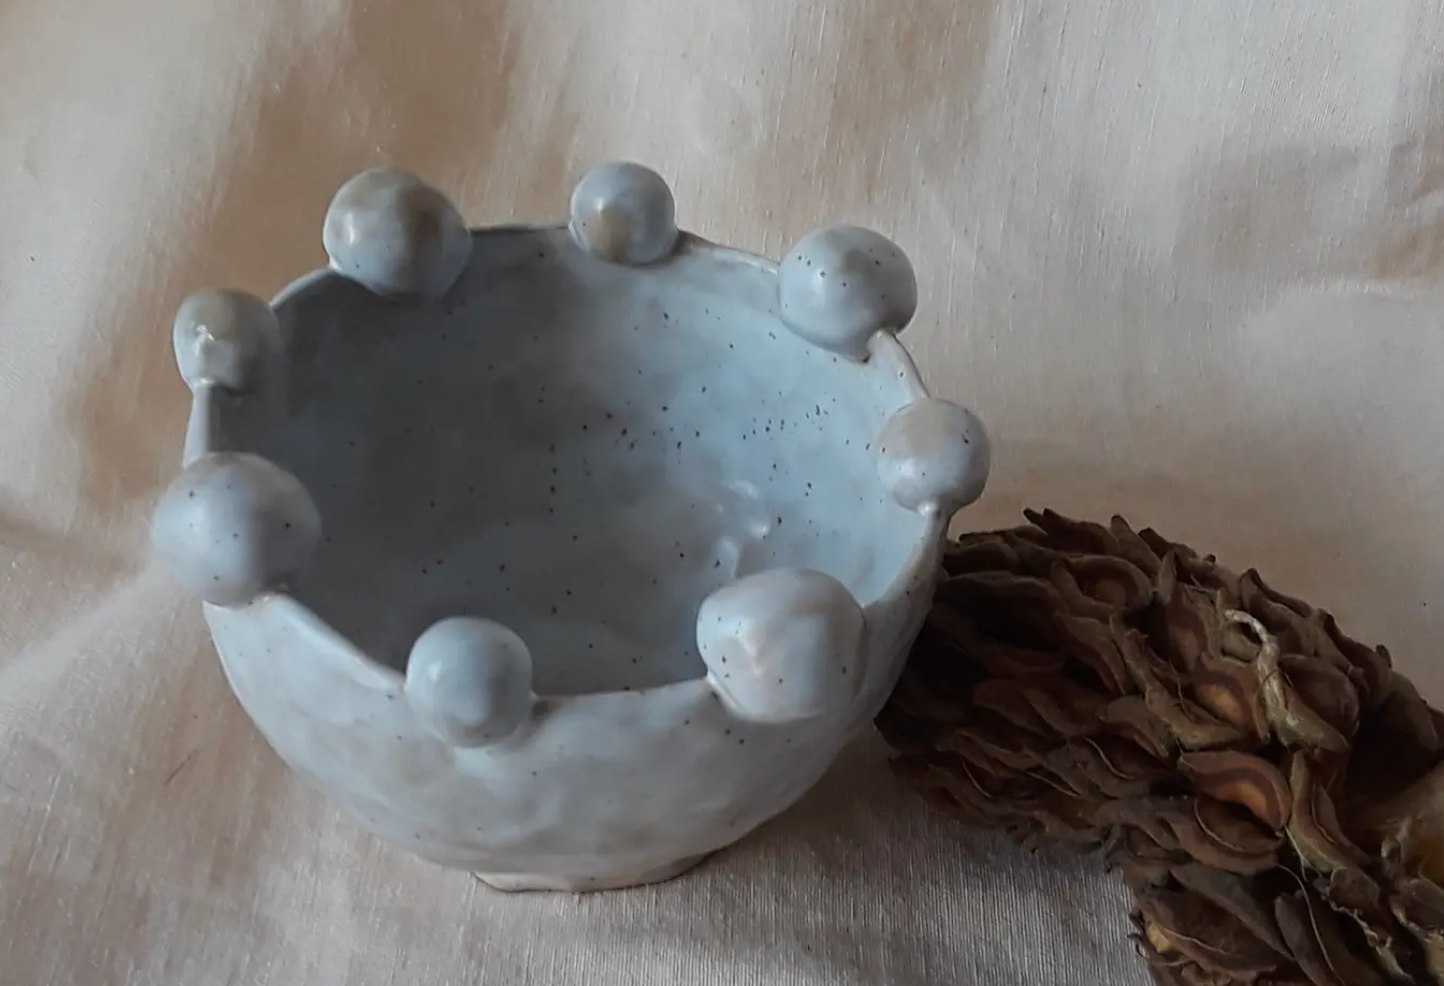 curious clay balance ball bowl with white speckled glaze available at thread spun